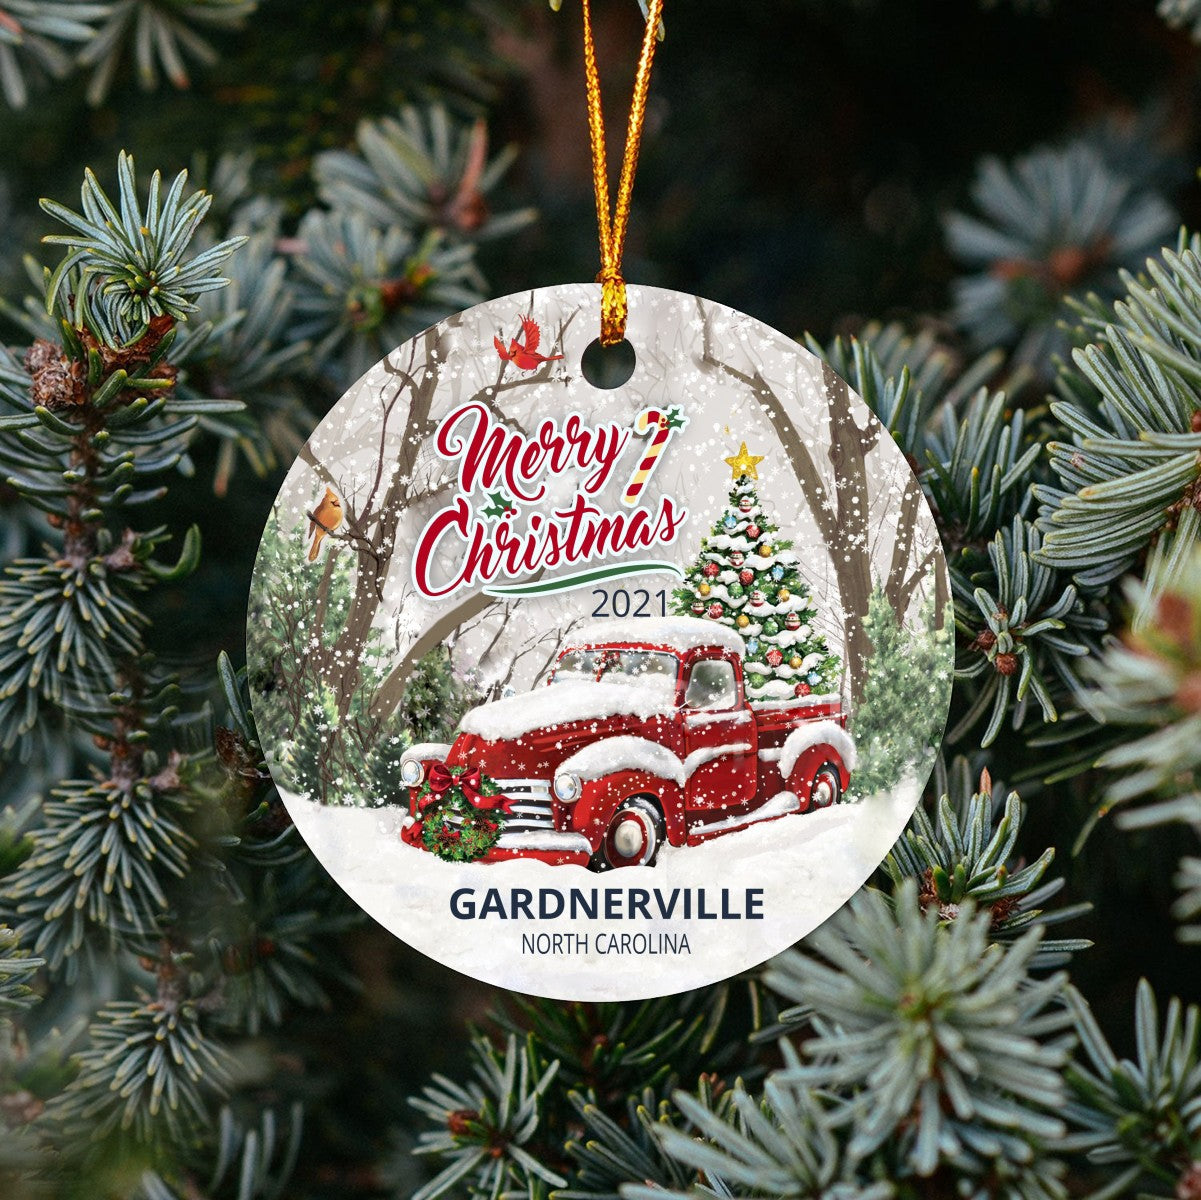 Christmas Tree Ornaments Gardnerville - Ornament With Name City, State Gardnerville North Carolina NC Ornament - Red Truck Xmas Ornaments 3'' Plastic Gift For Family, Friend And Housewarming